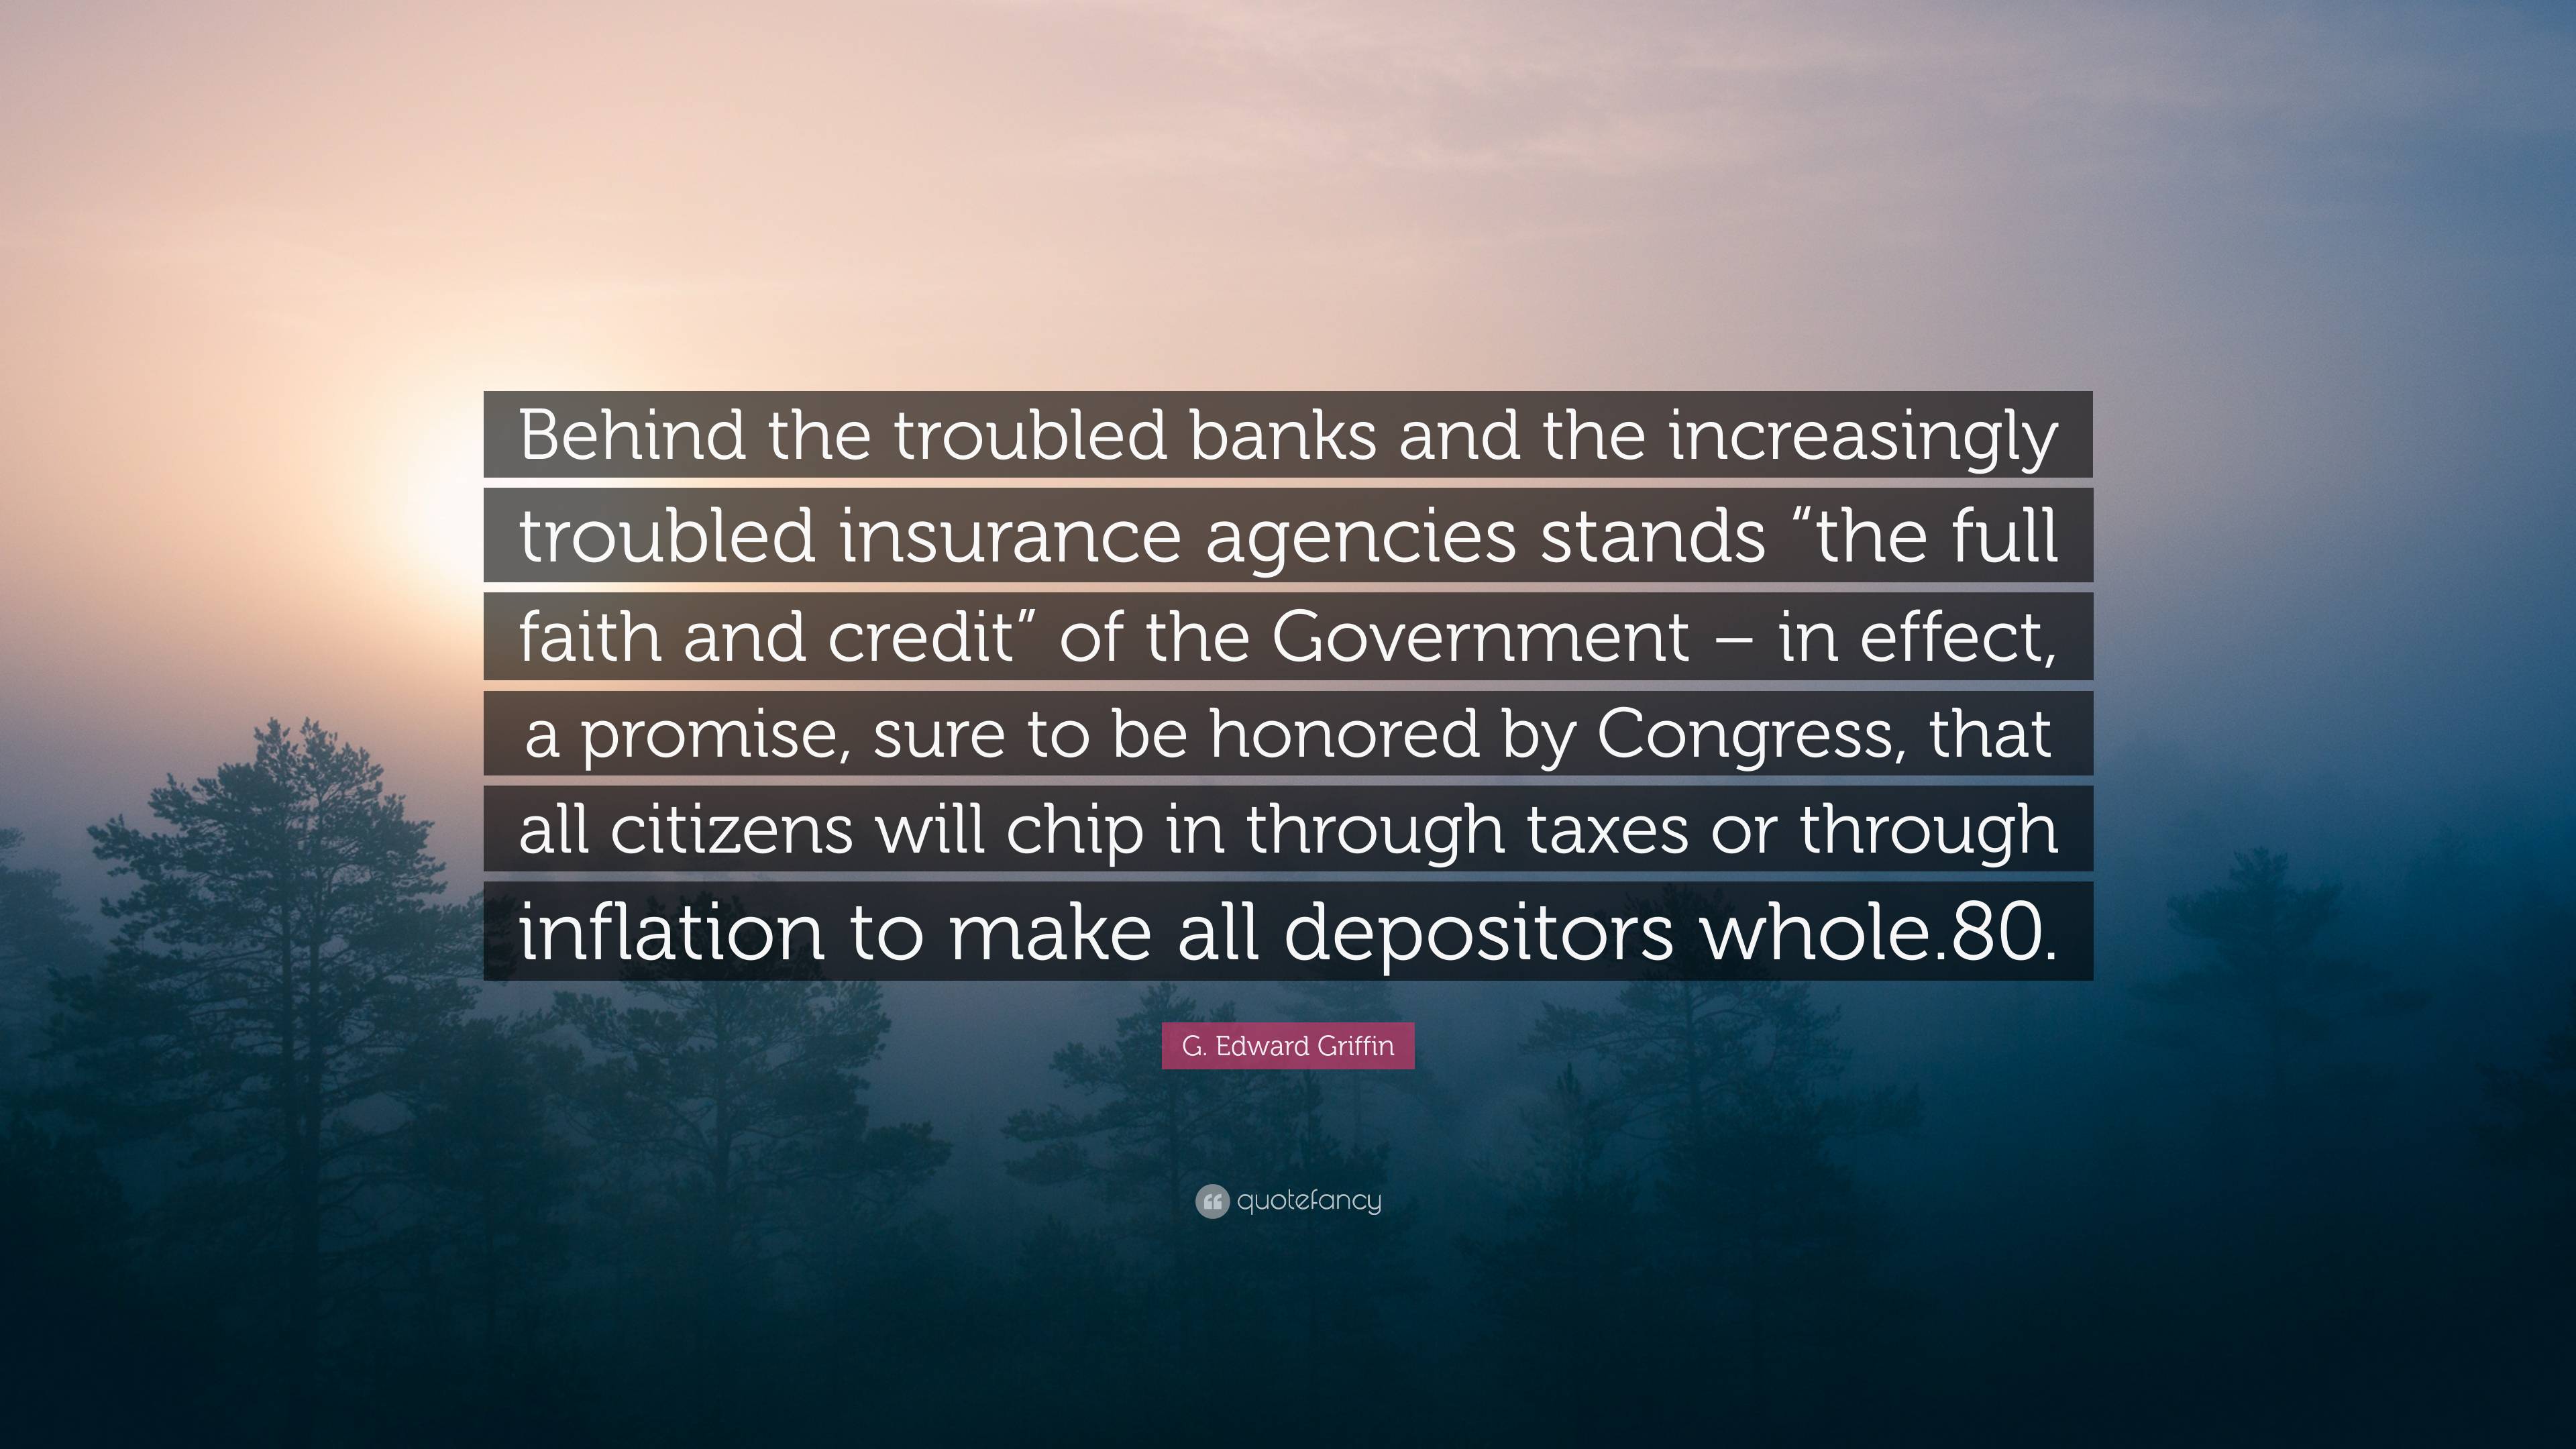 G. Edward Griffin Quote “Behind the troubled banks and the